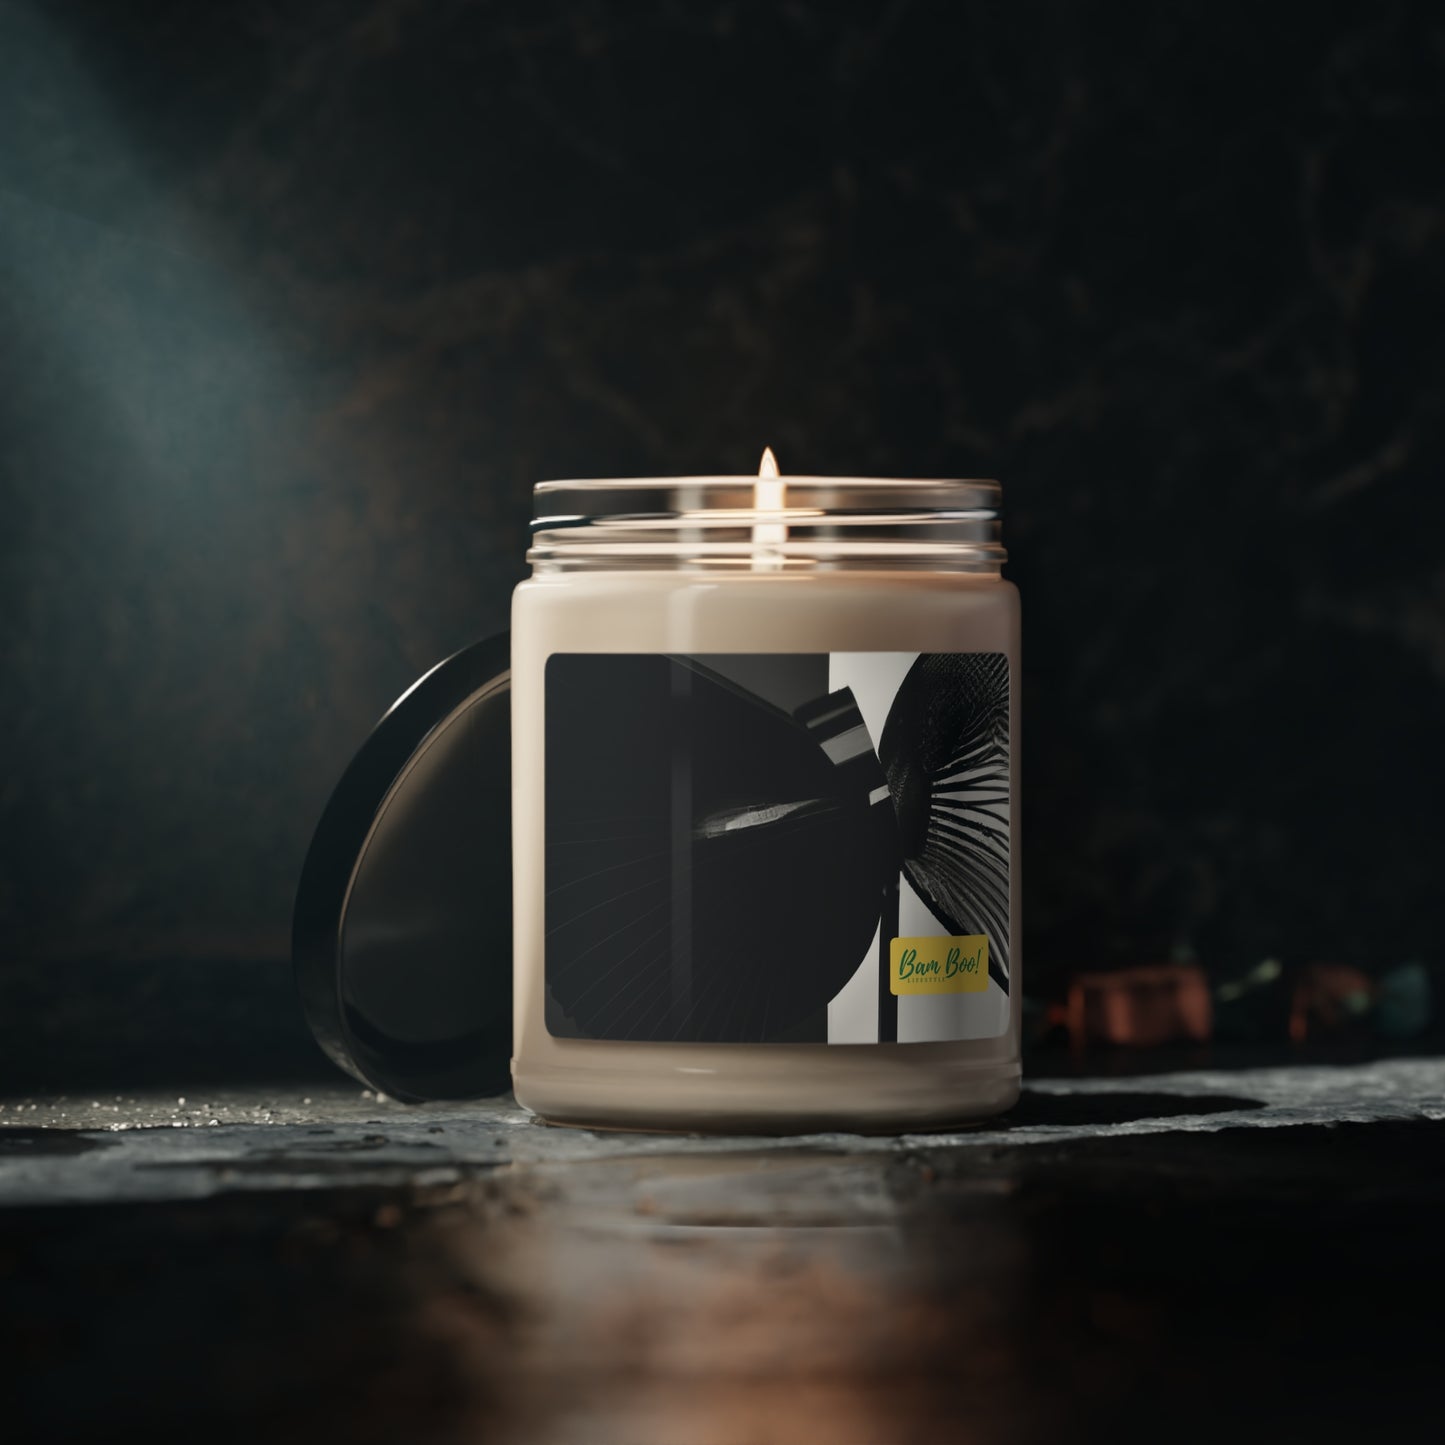 "Illuminating the Ordinary: A Vision of the Familiar in Light and Form" - Bam Boo! Lifestyle Eco-friendly Soy Candle